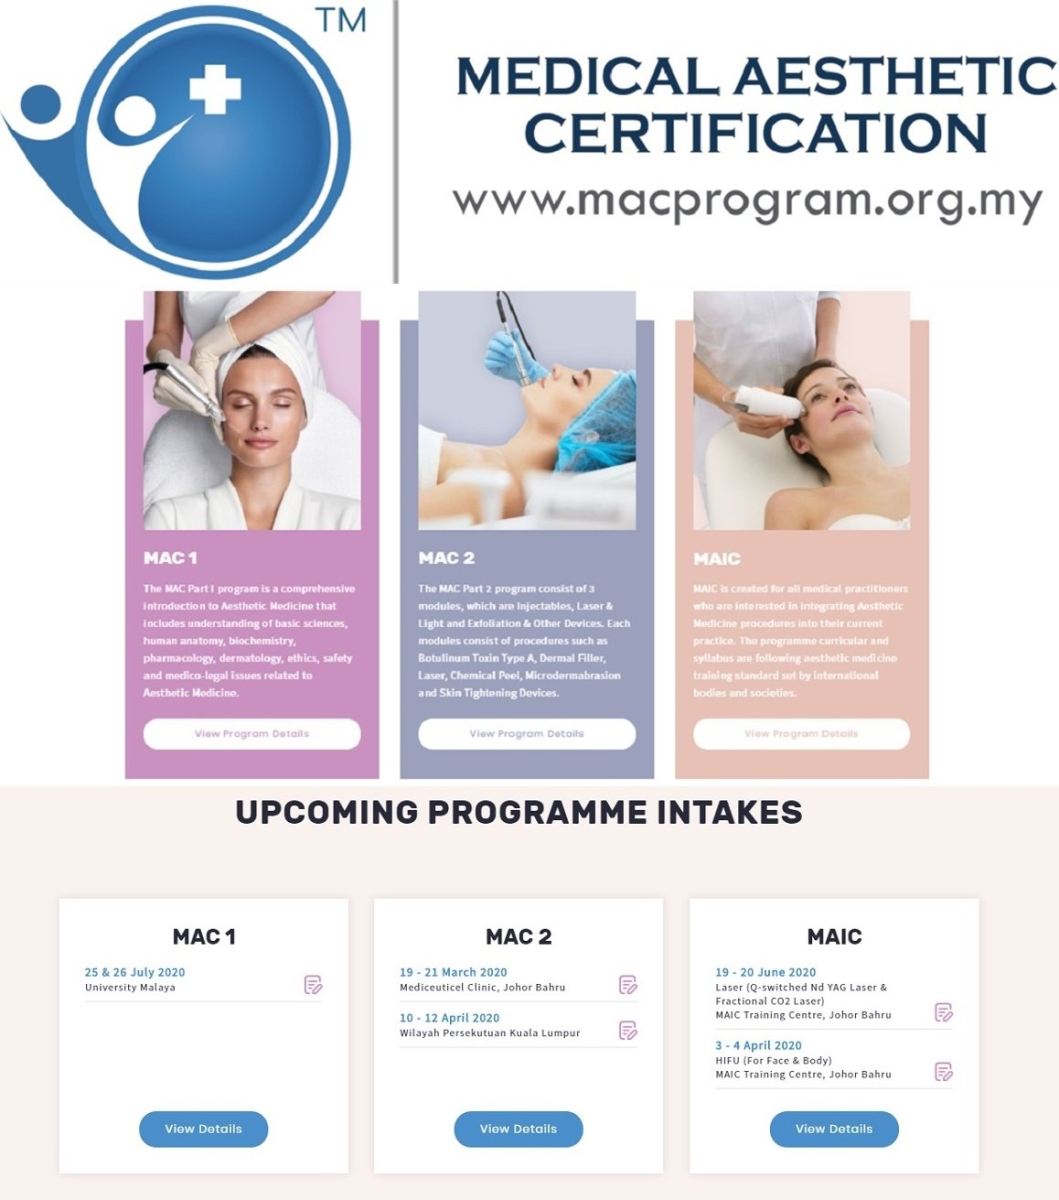 Oralix's Collaboration with Medical Aesthetic Certification Program